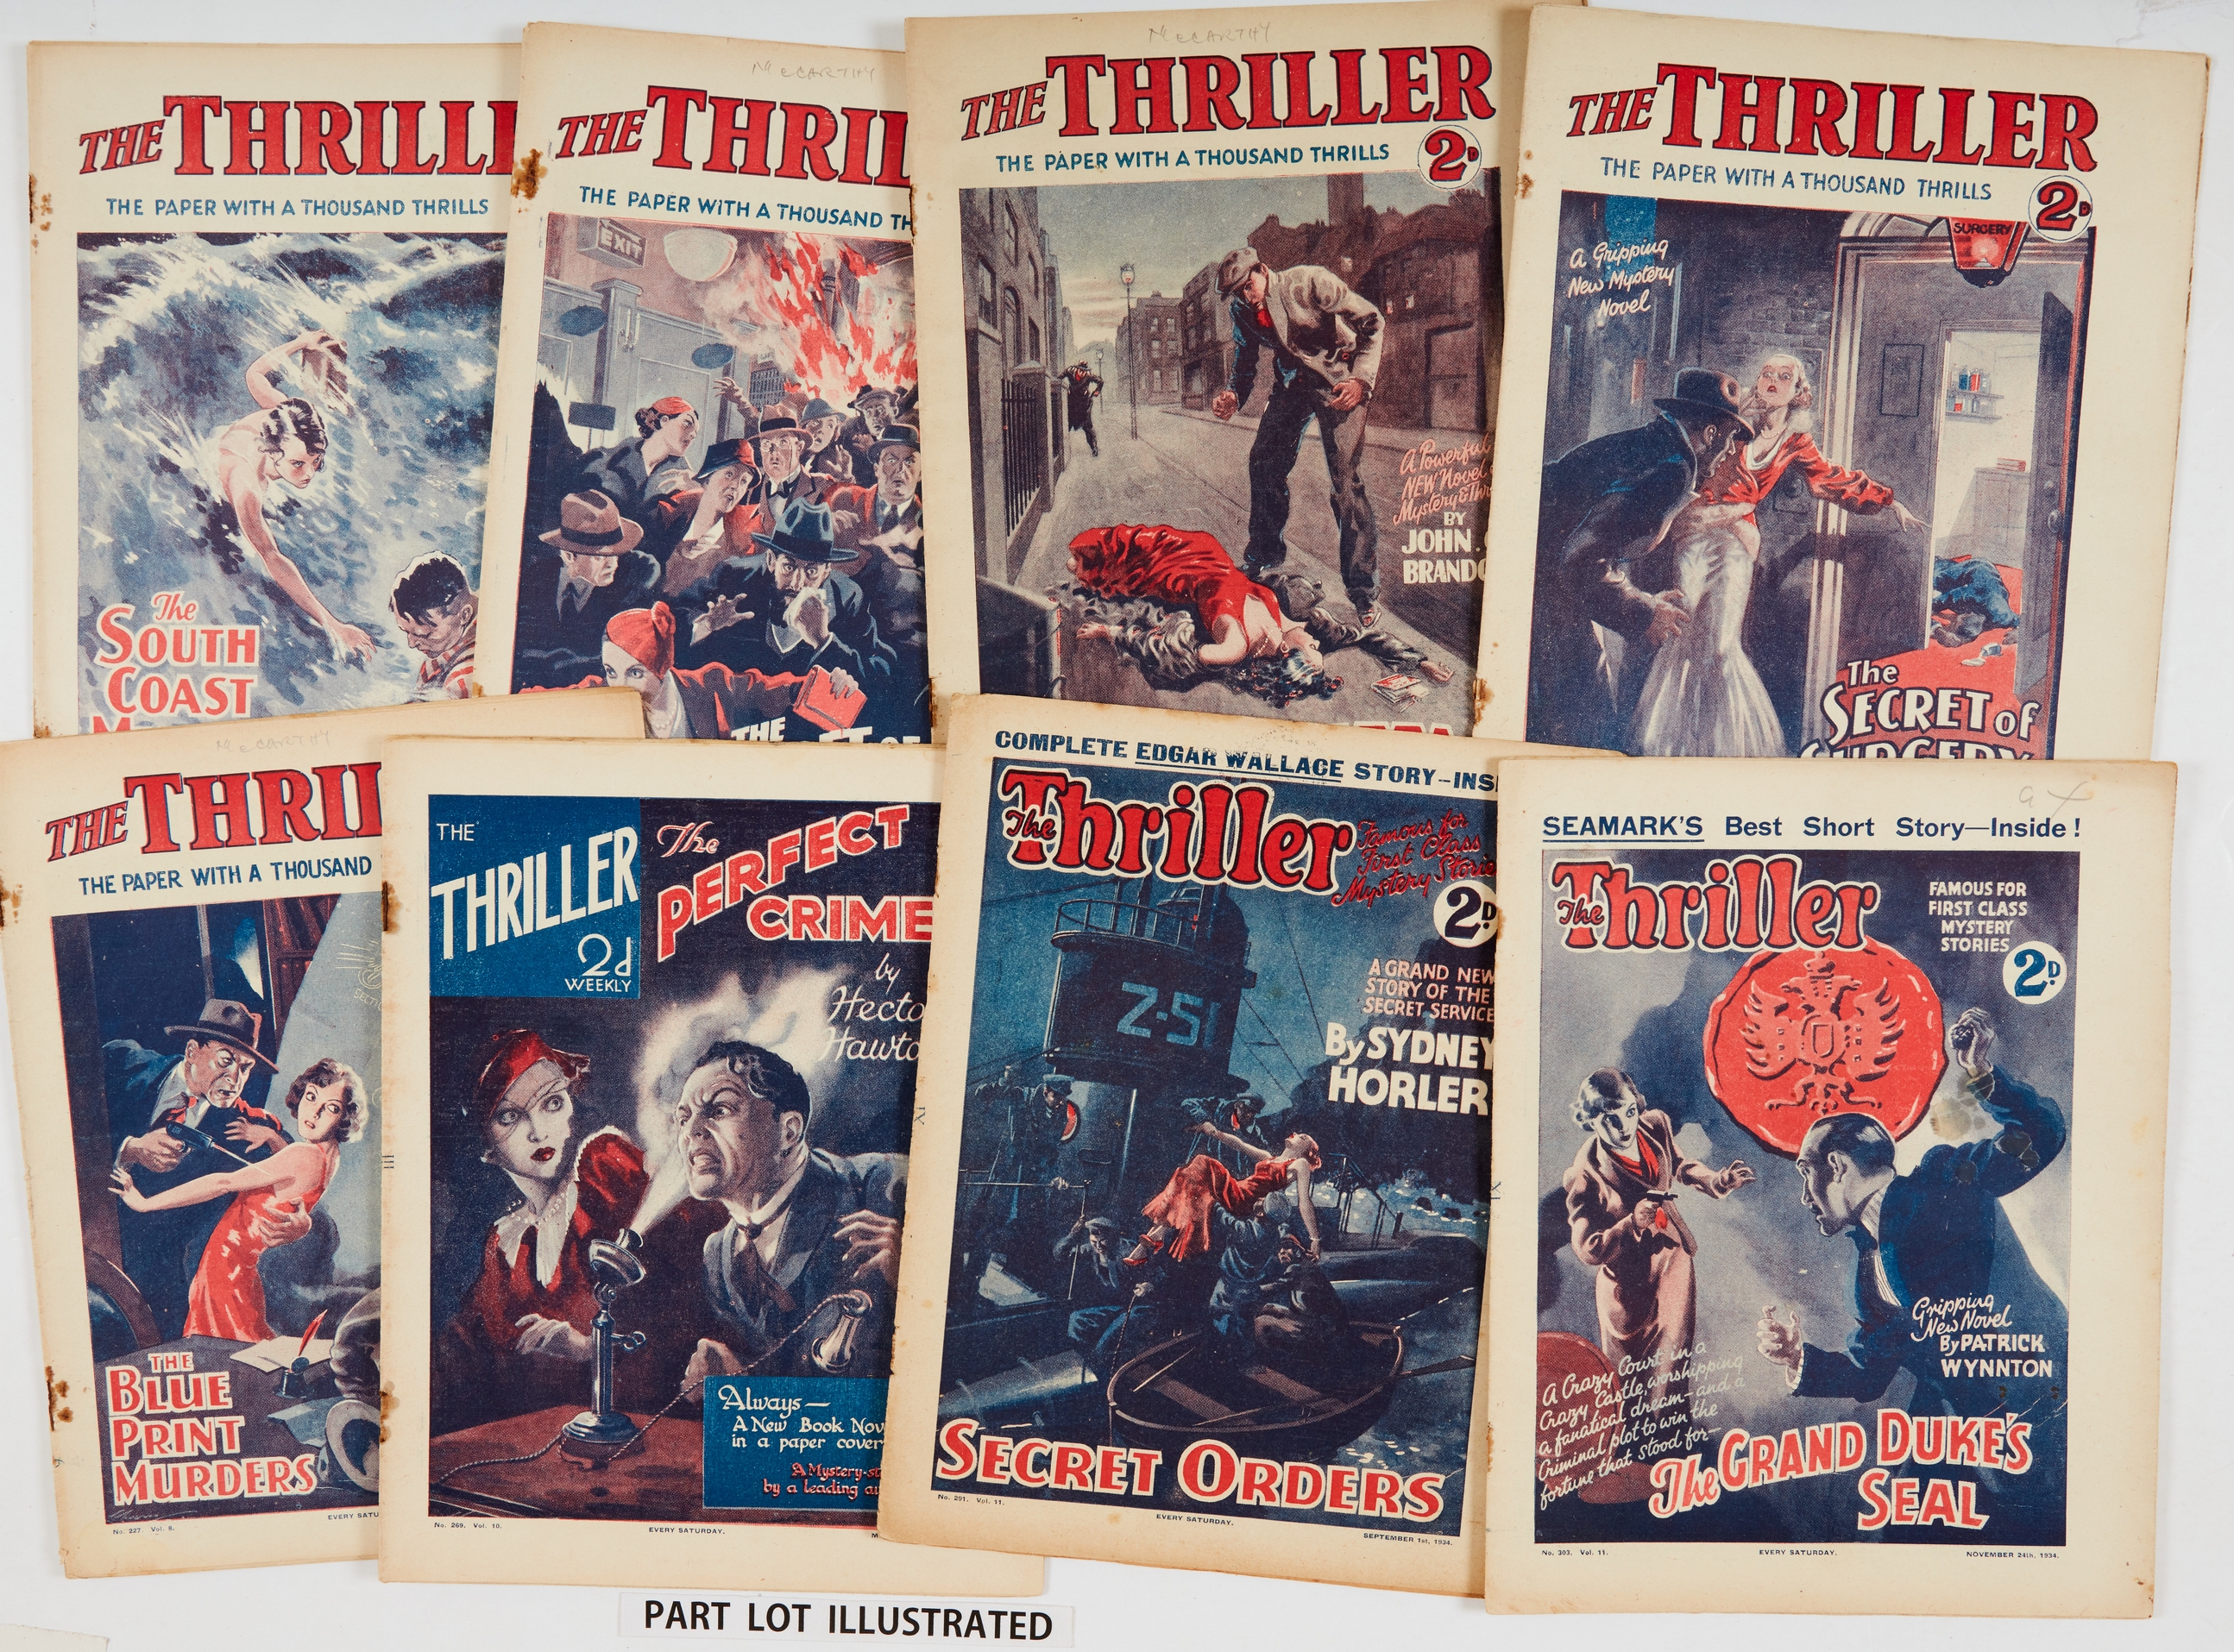 The Thriller (1933-34) 43 issues between 205-304 with Raffles by Barry Perowne and stories by John